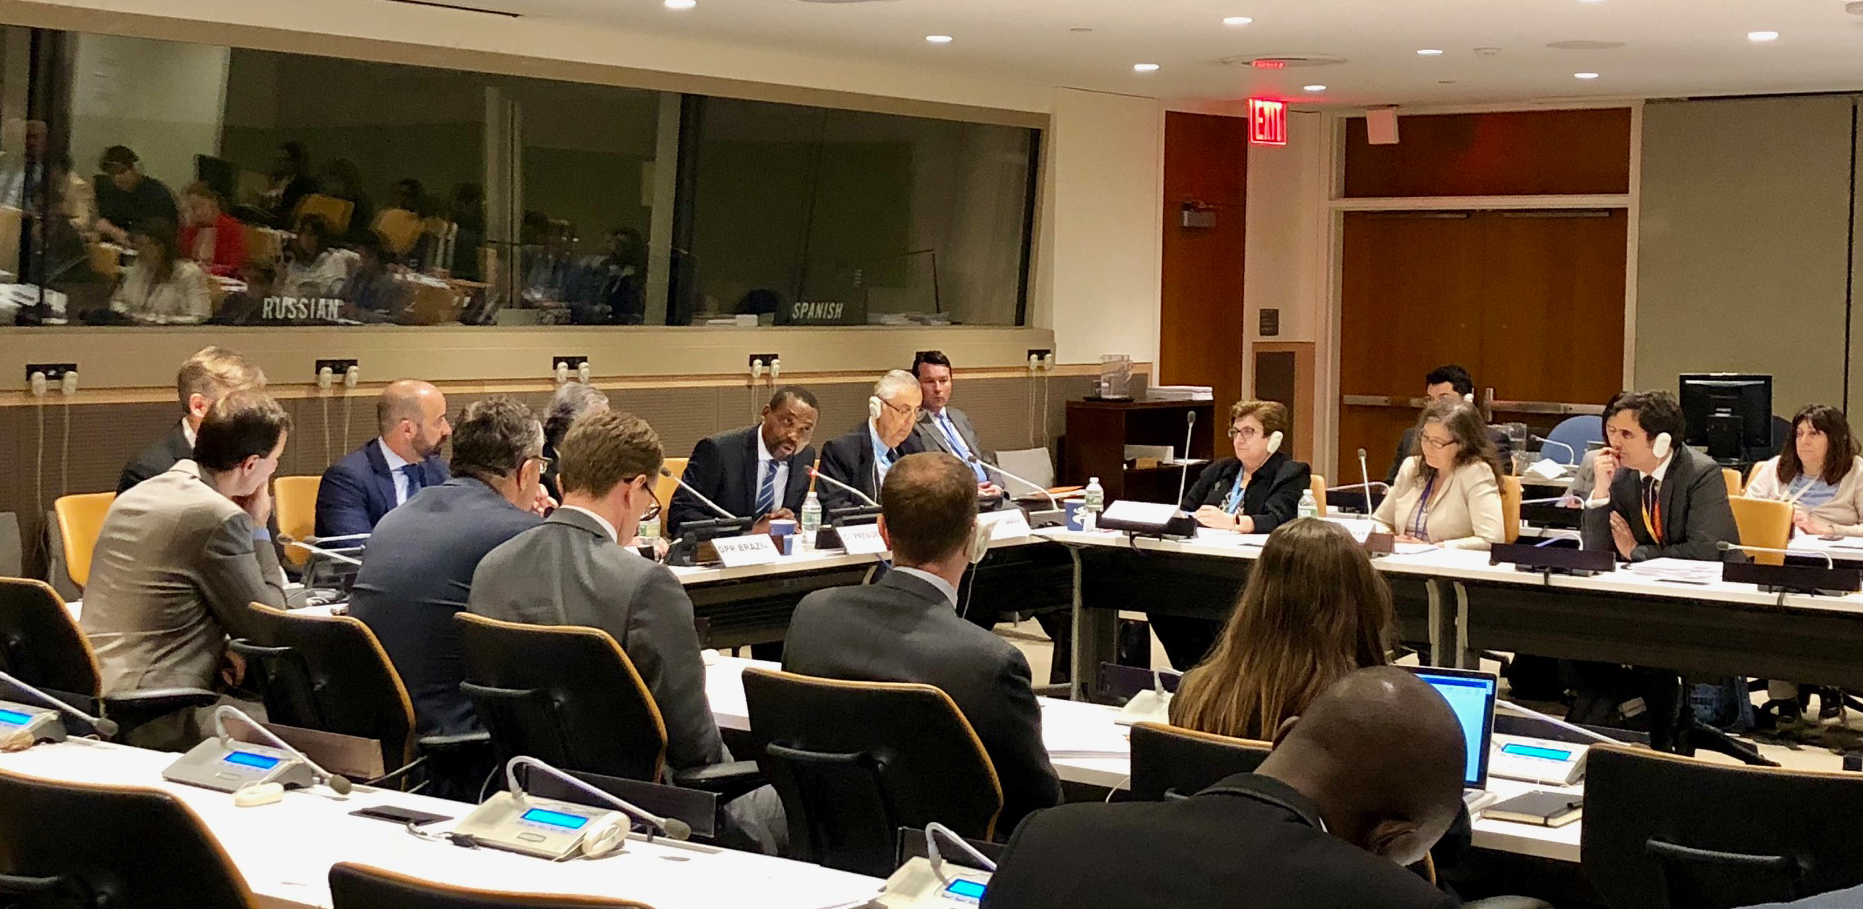 ICC President Judge Chile Eboe-Osuji gives keynote remarks at “International Law Commission and the fight against impunity” event in New York © ICC-CPI